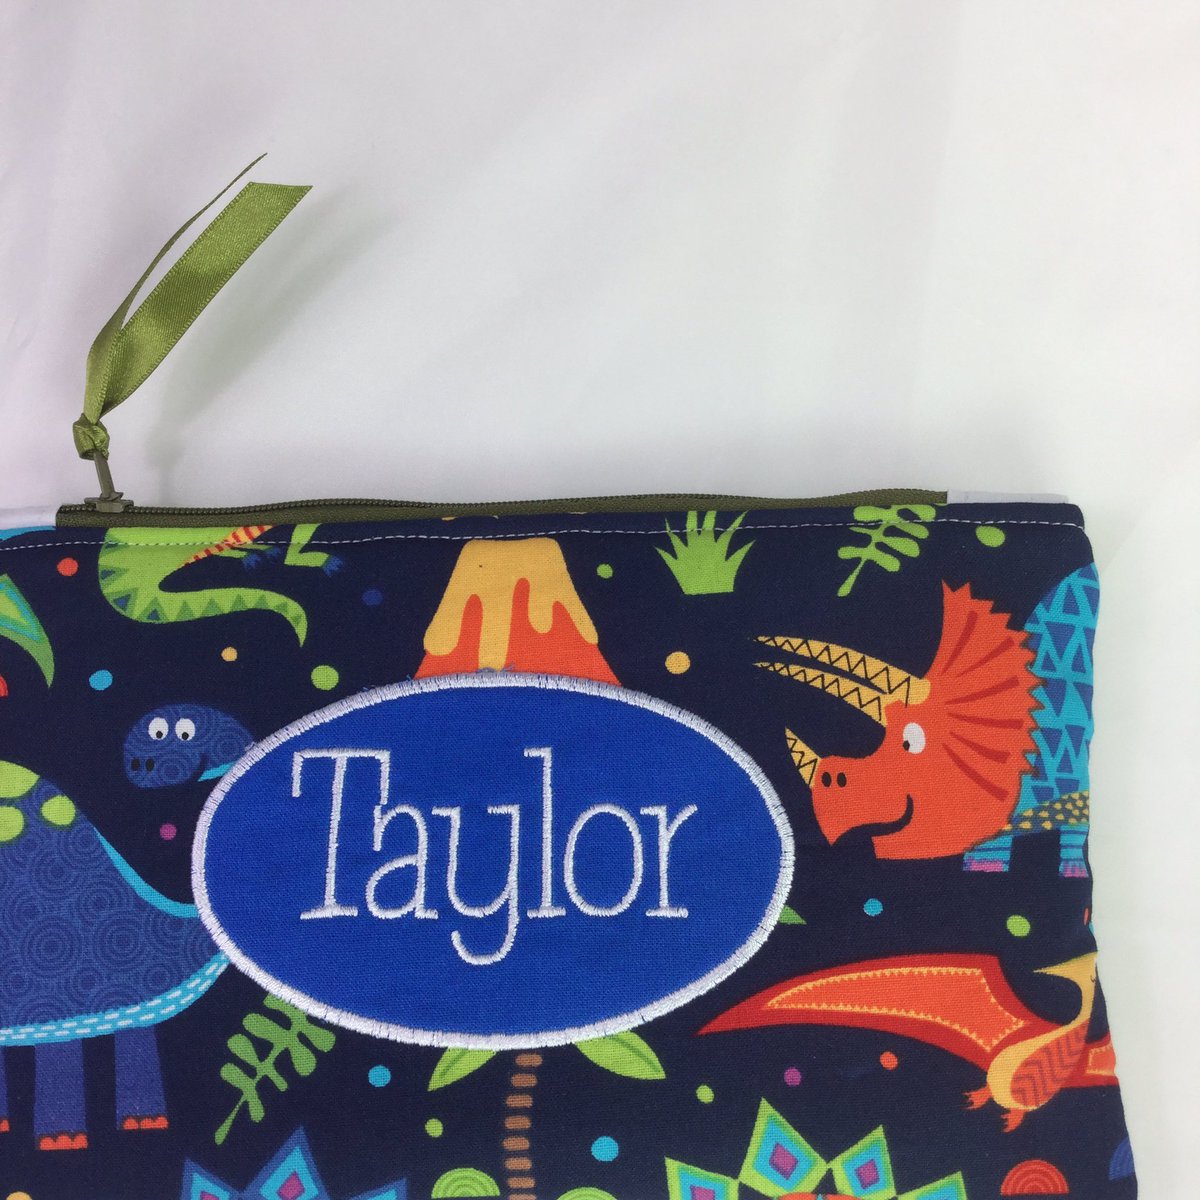 Morning #ukgifthour #ukgiftam 
“Looked amazing & came on time. My nephew loved it” 
Just had this lovely 5* review for babahoot.com pencil cases. Makes great gift, lots of different designs. DM me if you can’t find design you need. #pencilcase #pencilpouch #handmade